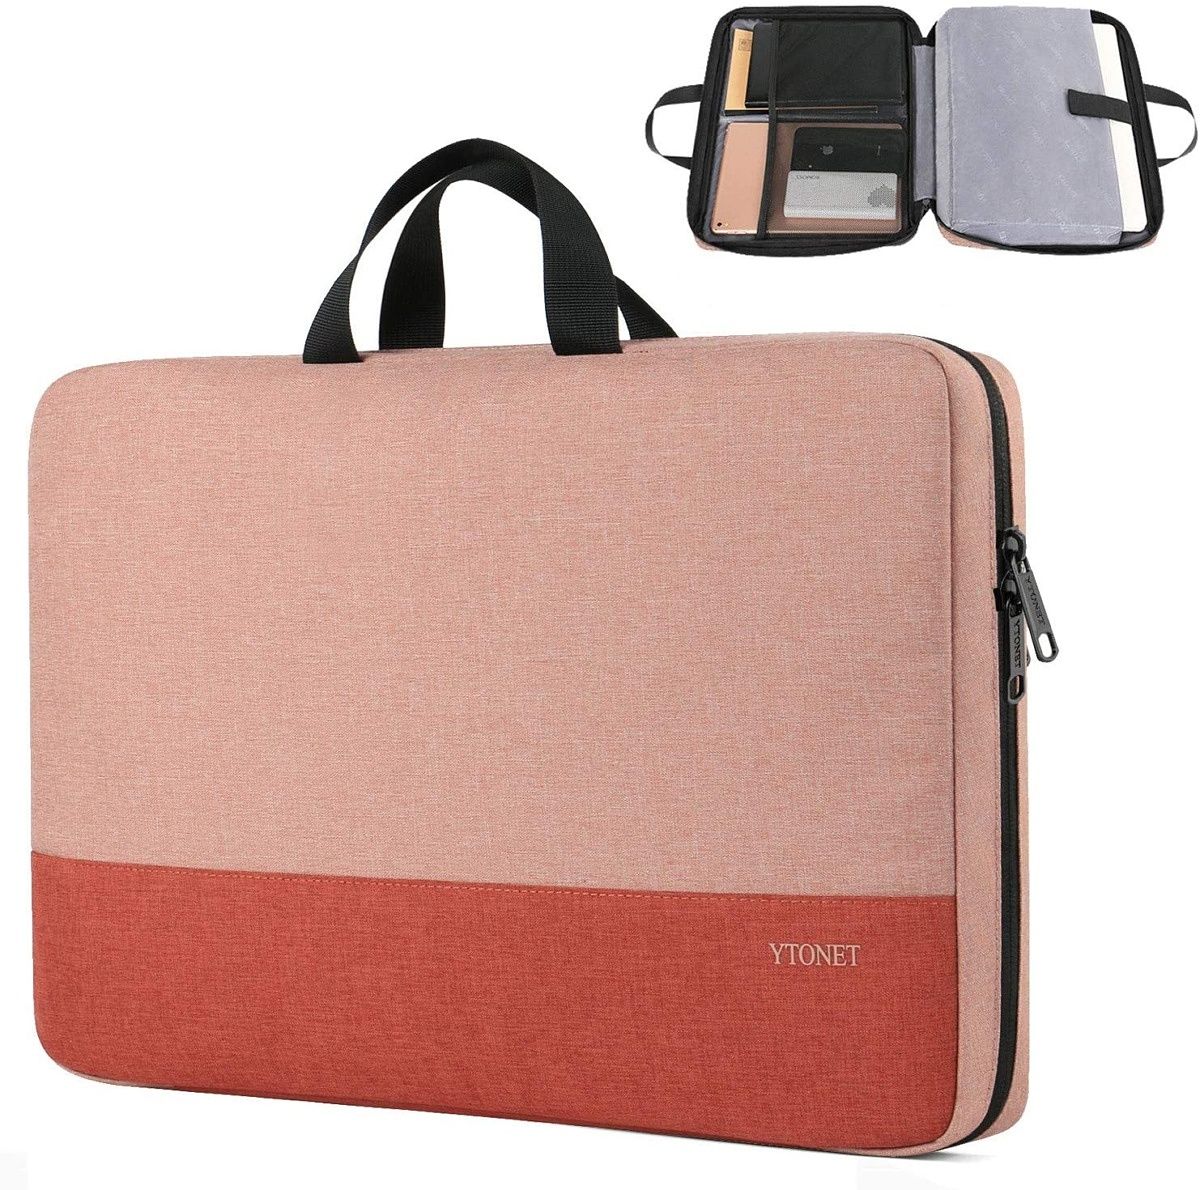 This Ytonet sleeve gives your basic protection for your laptop with a water-resistant layer and shock-absorbent materials to withstand drops and bumps. It comes in a few color options so you can get something that suits you.